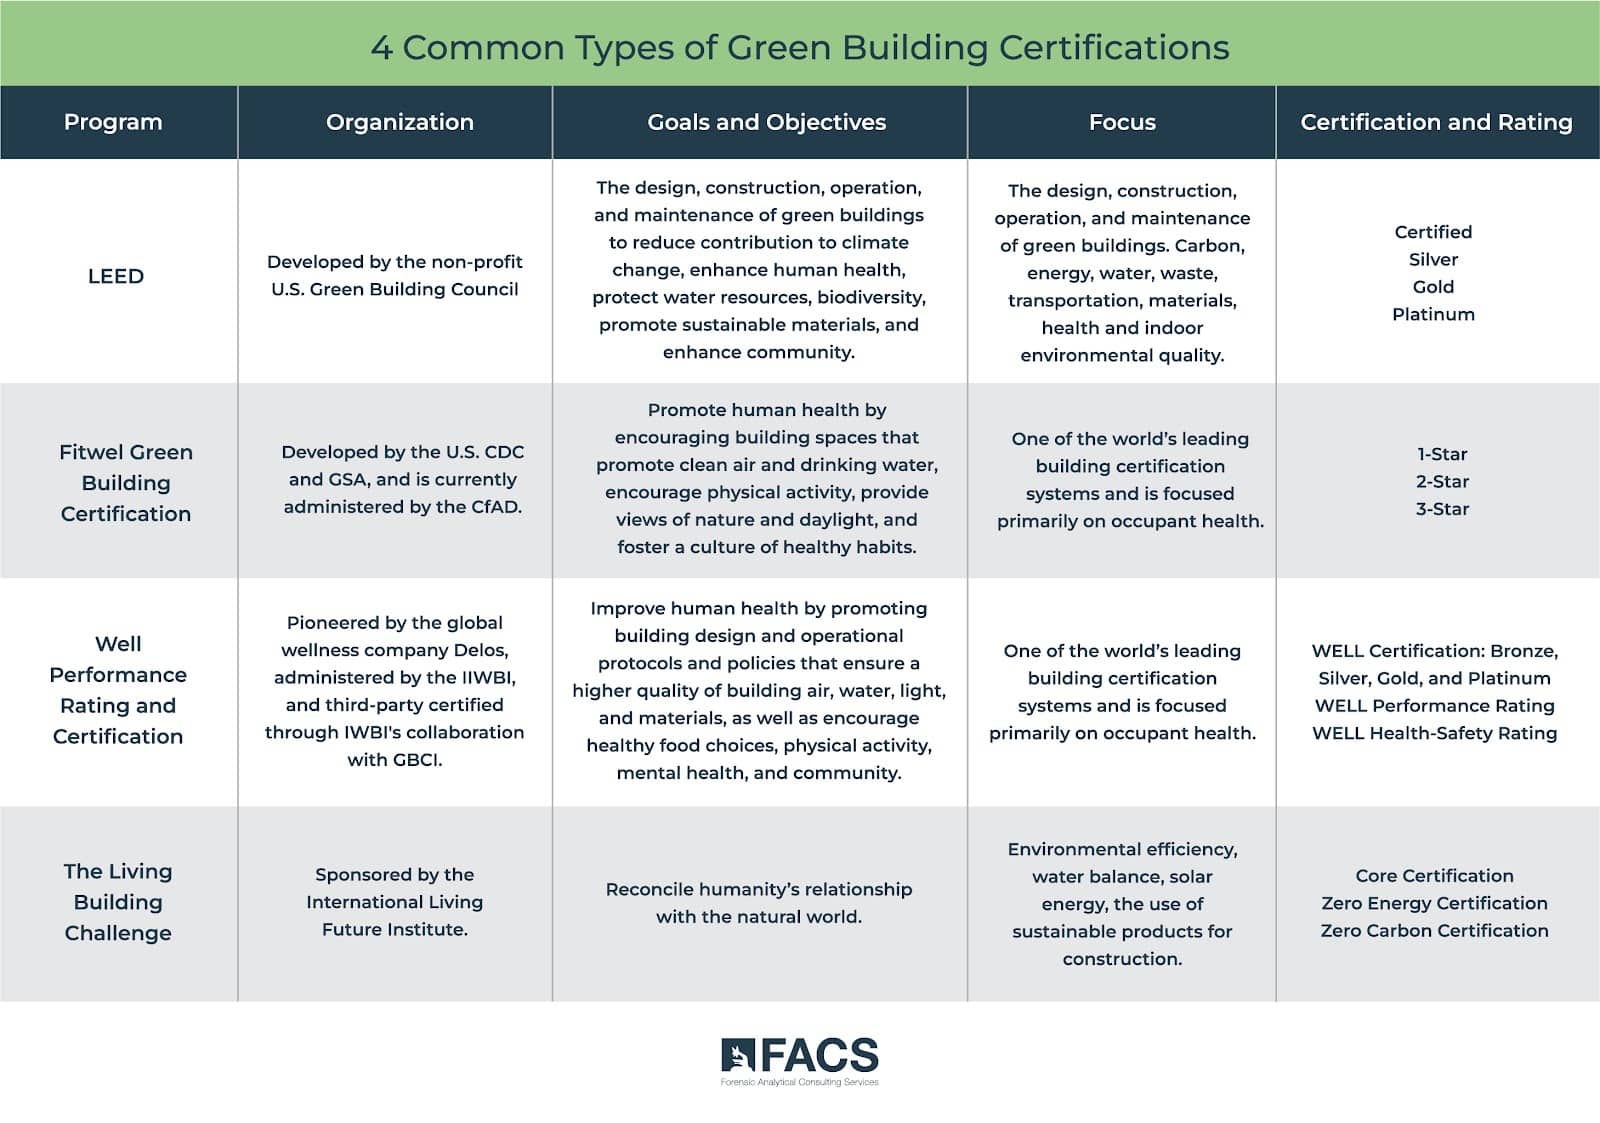 4 Common Types of Green Building Certifications: Graphic explaining LEED (Leadership in Energy and Environmental Design) Certification, Fitwel Green Building Certification, WELL Performance Rating and Certification, & The Living Building Challenge